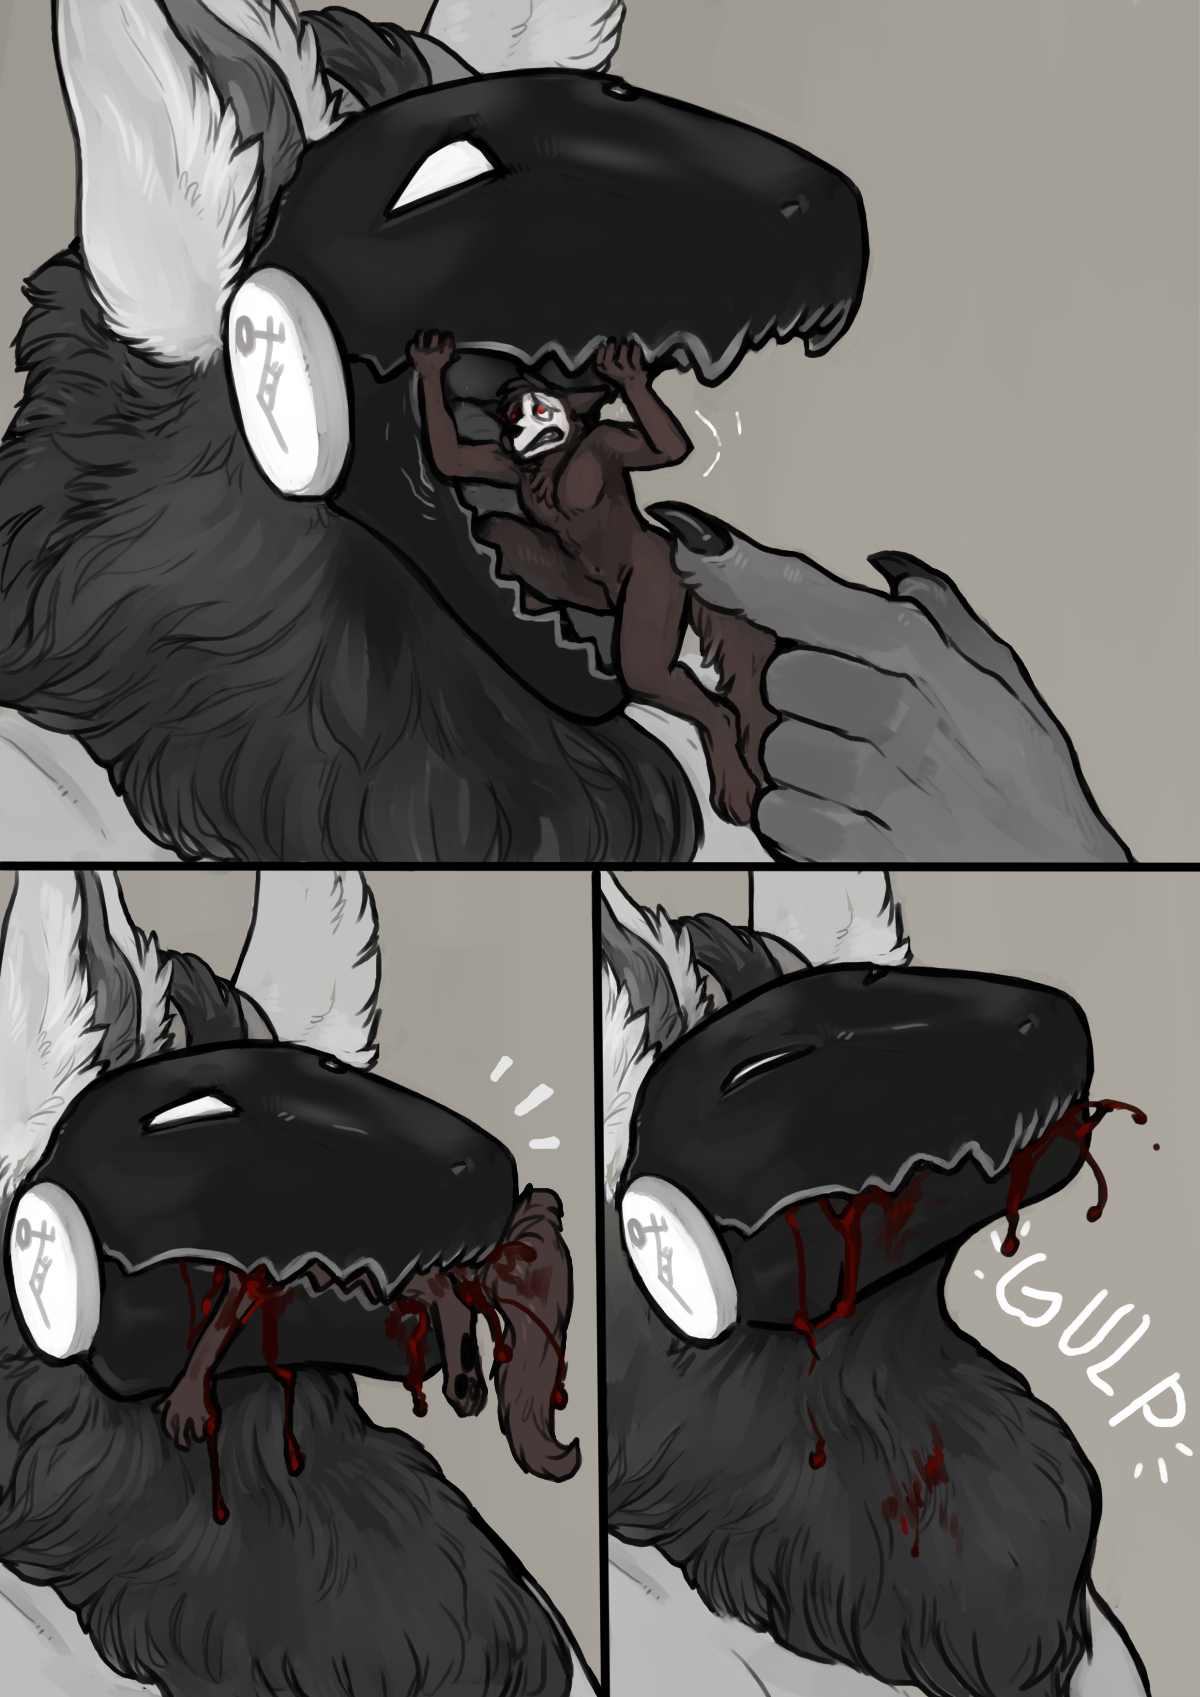 Blood Furry Porn - Image} Anyone else love hard vore featuring robots? I can't get enough  (Torakuta) [Hard Vore] [Gore] [Blood] [Furry] : r/Vore